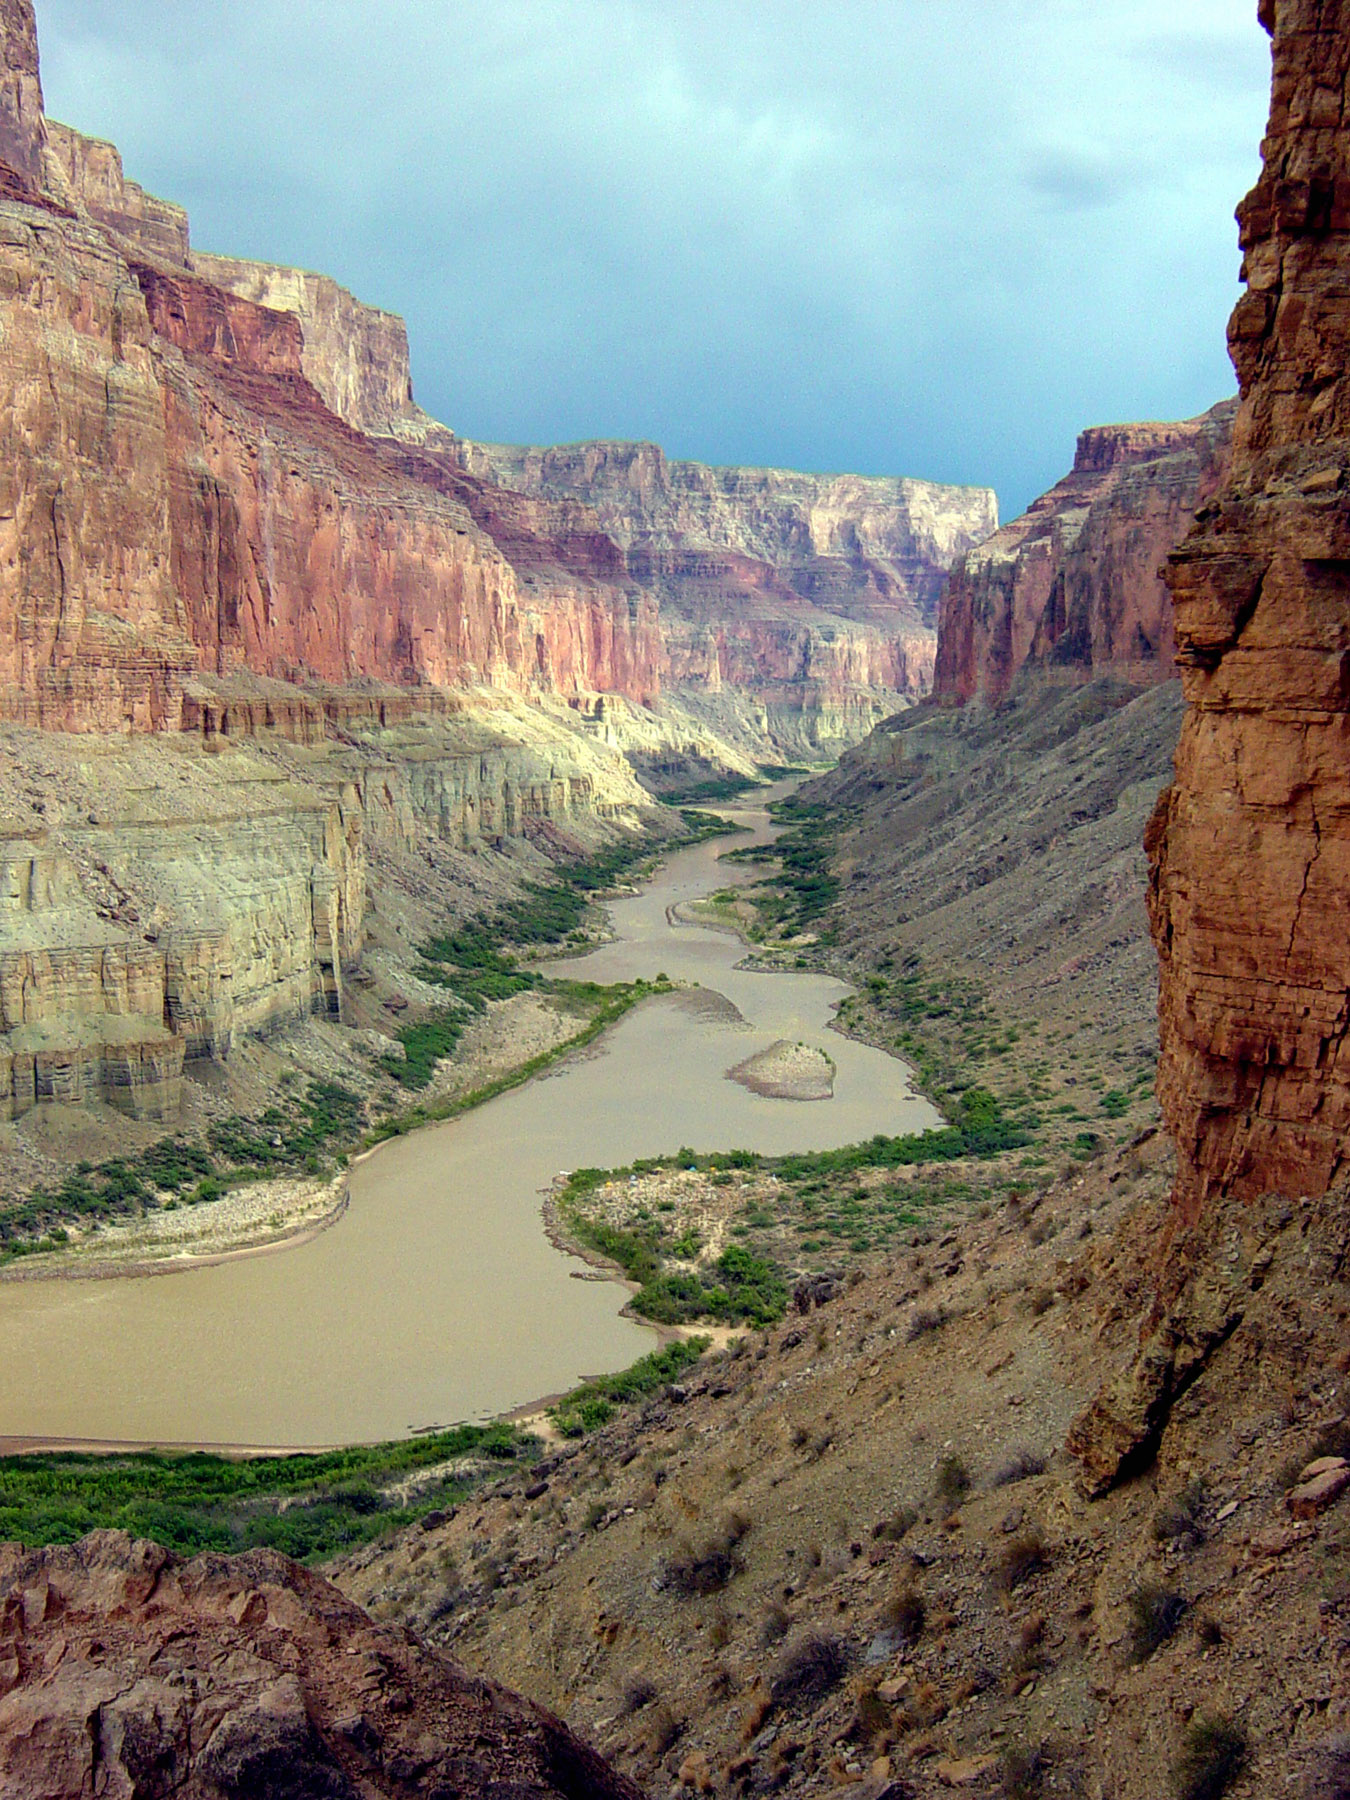 Tall canyon walls frame the wide Colorado river weaving back and forth.